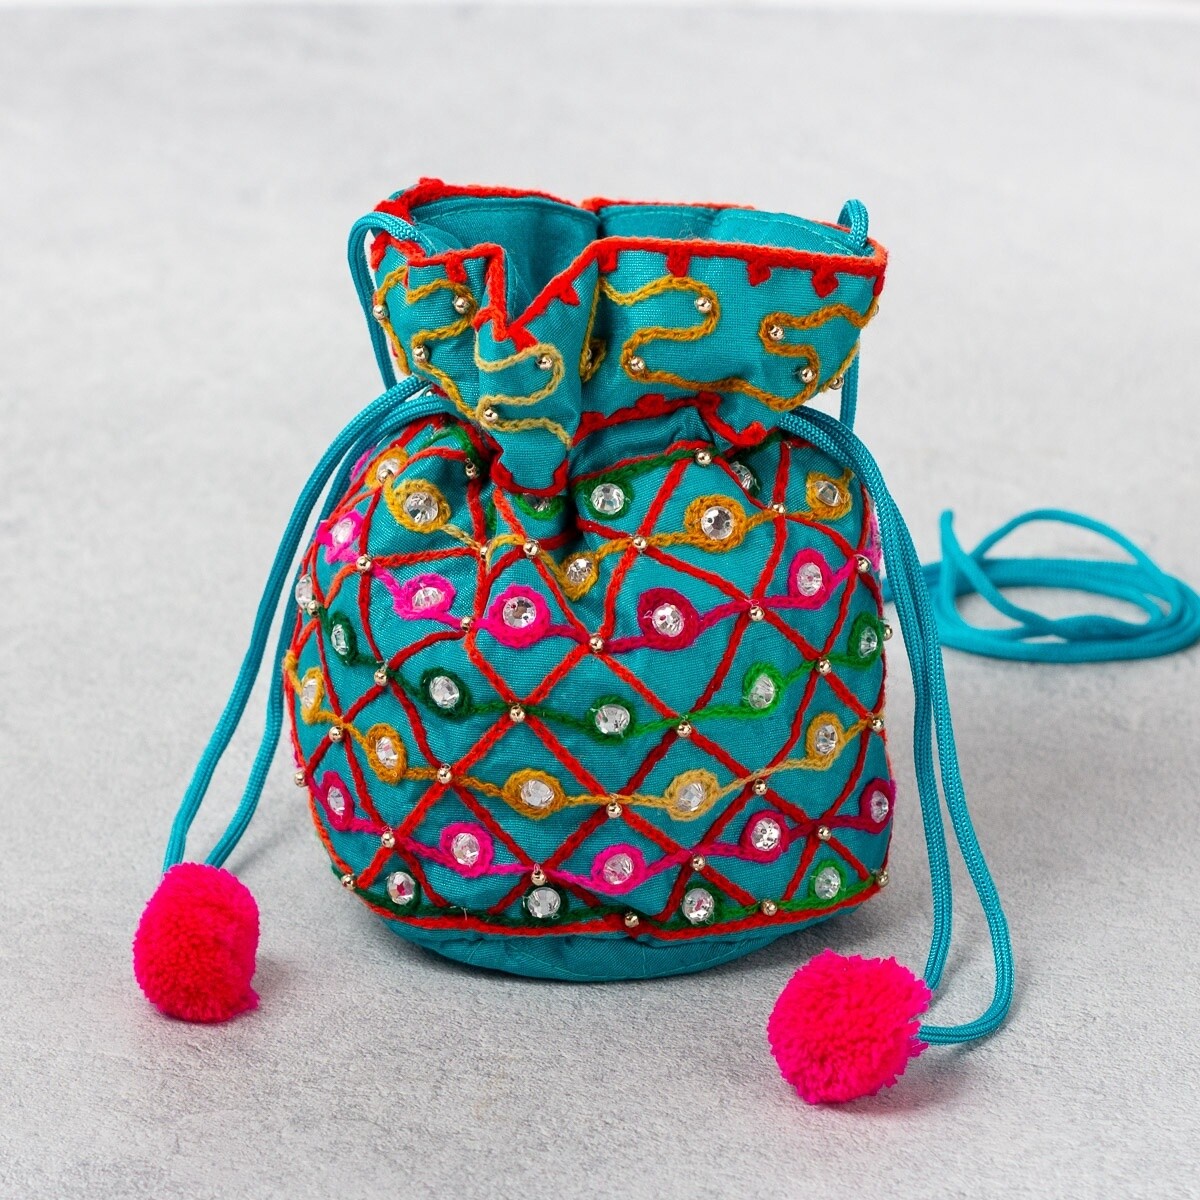 Hand Embroidered Recycled Drawstring Bag - Turquoise by Namaste